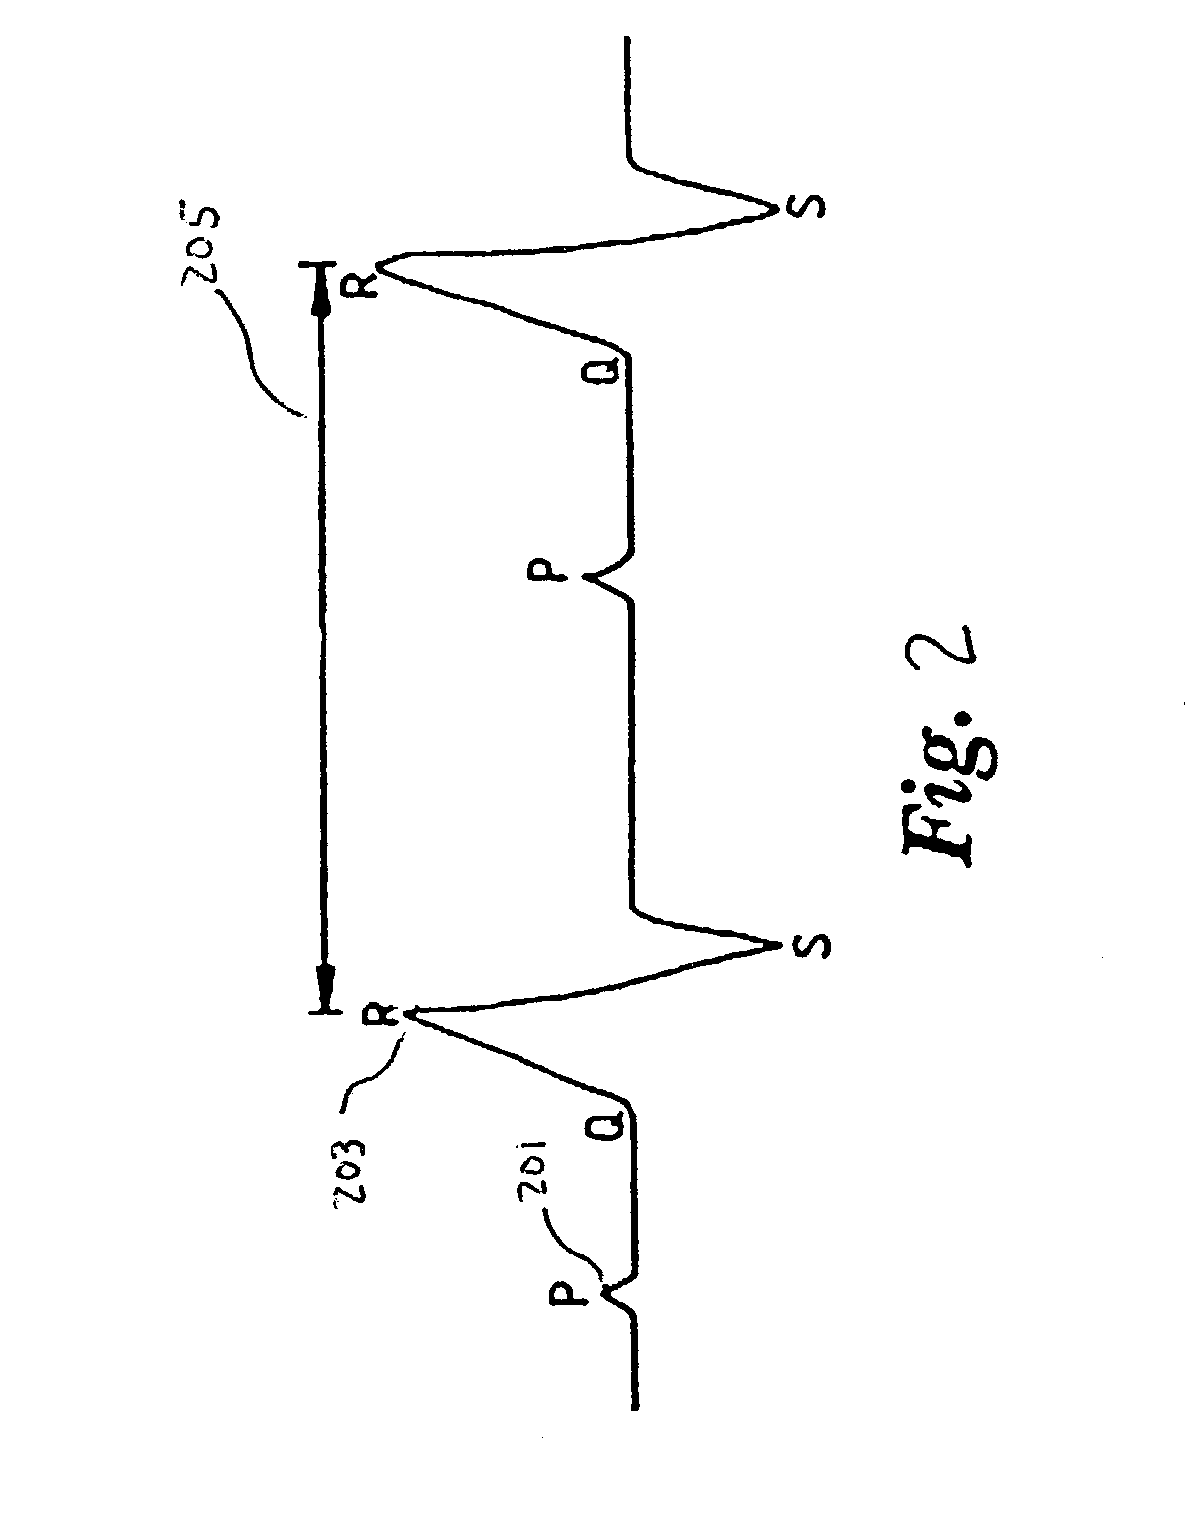 Method and apparatus for monitoring the autonomic nervous system using non-stationary spectral analysis of heart rate and respiratory activity